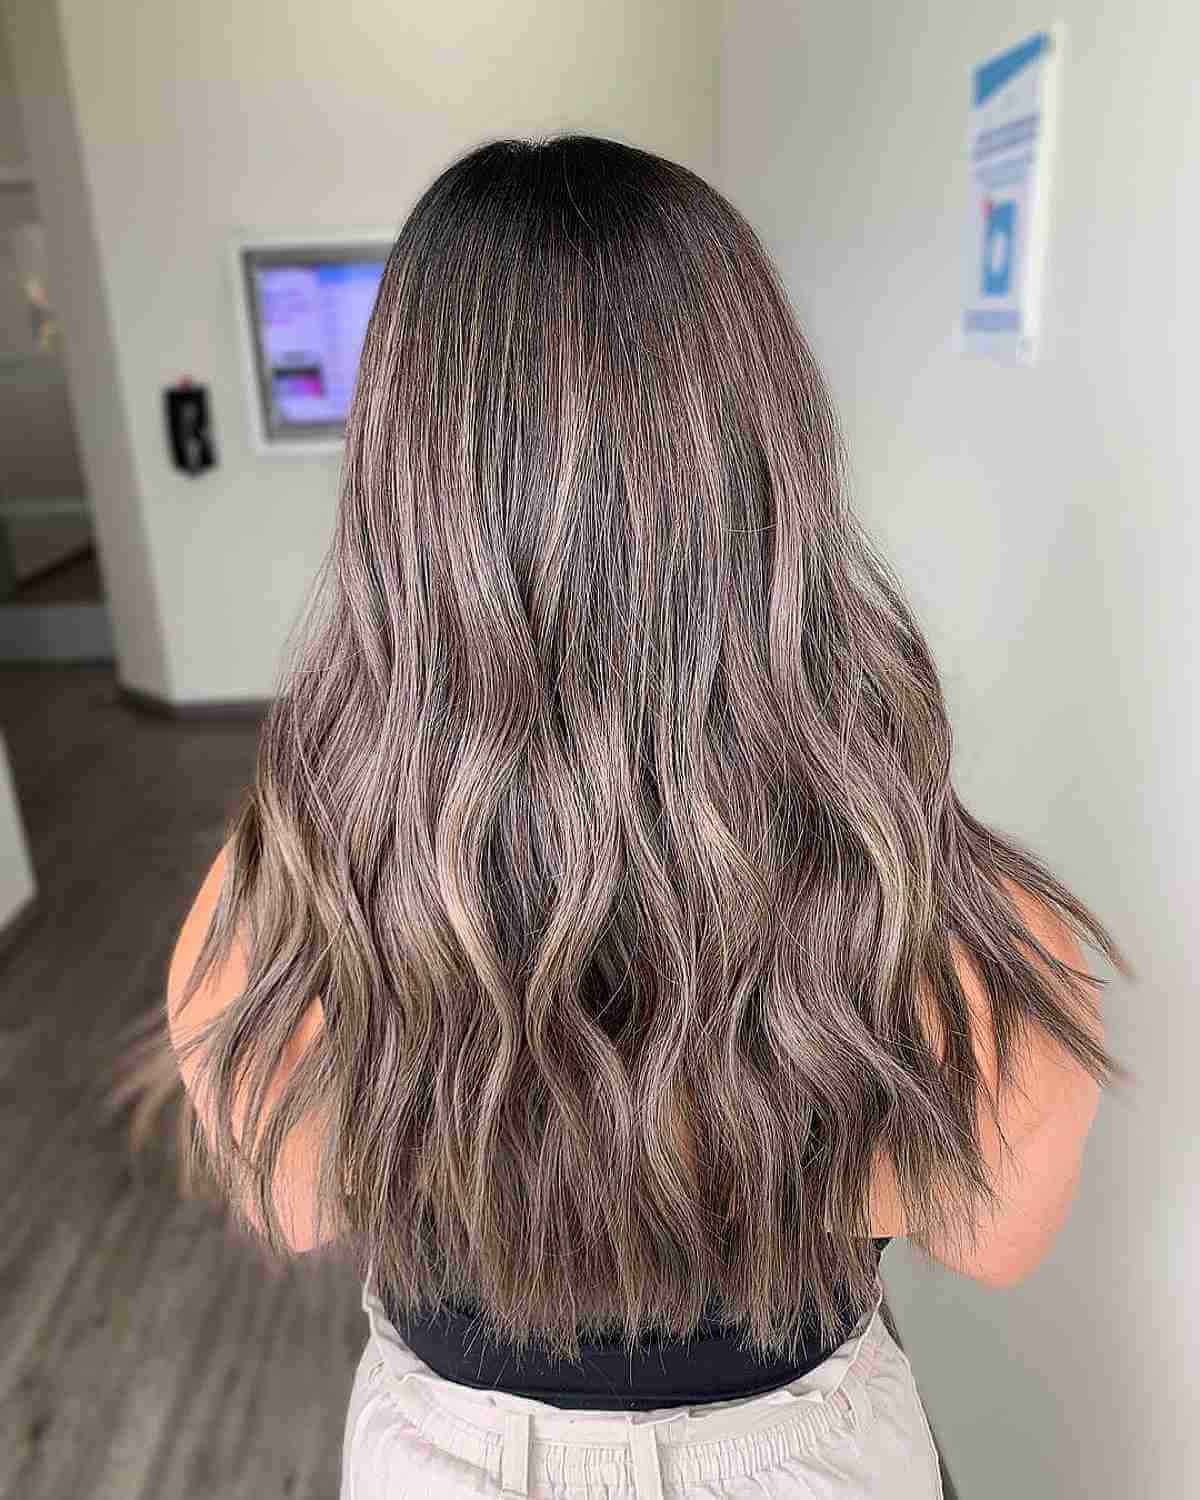 Chic Light Beige Ash Brown Hair with Choppy Ends